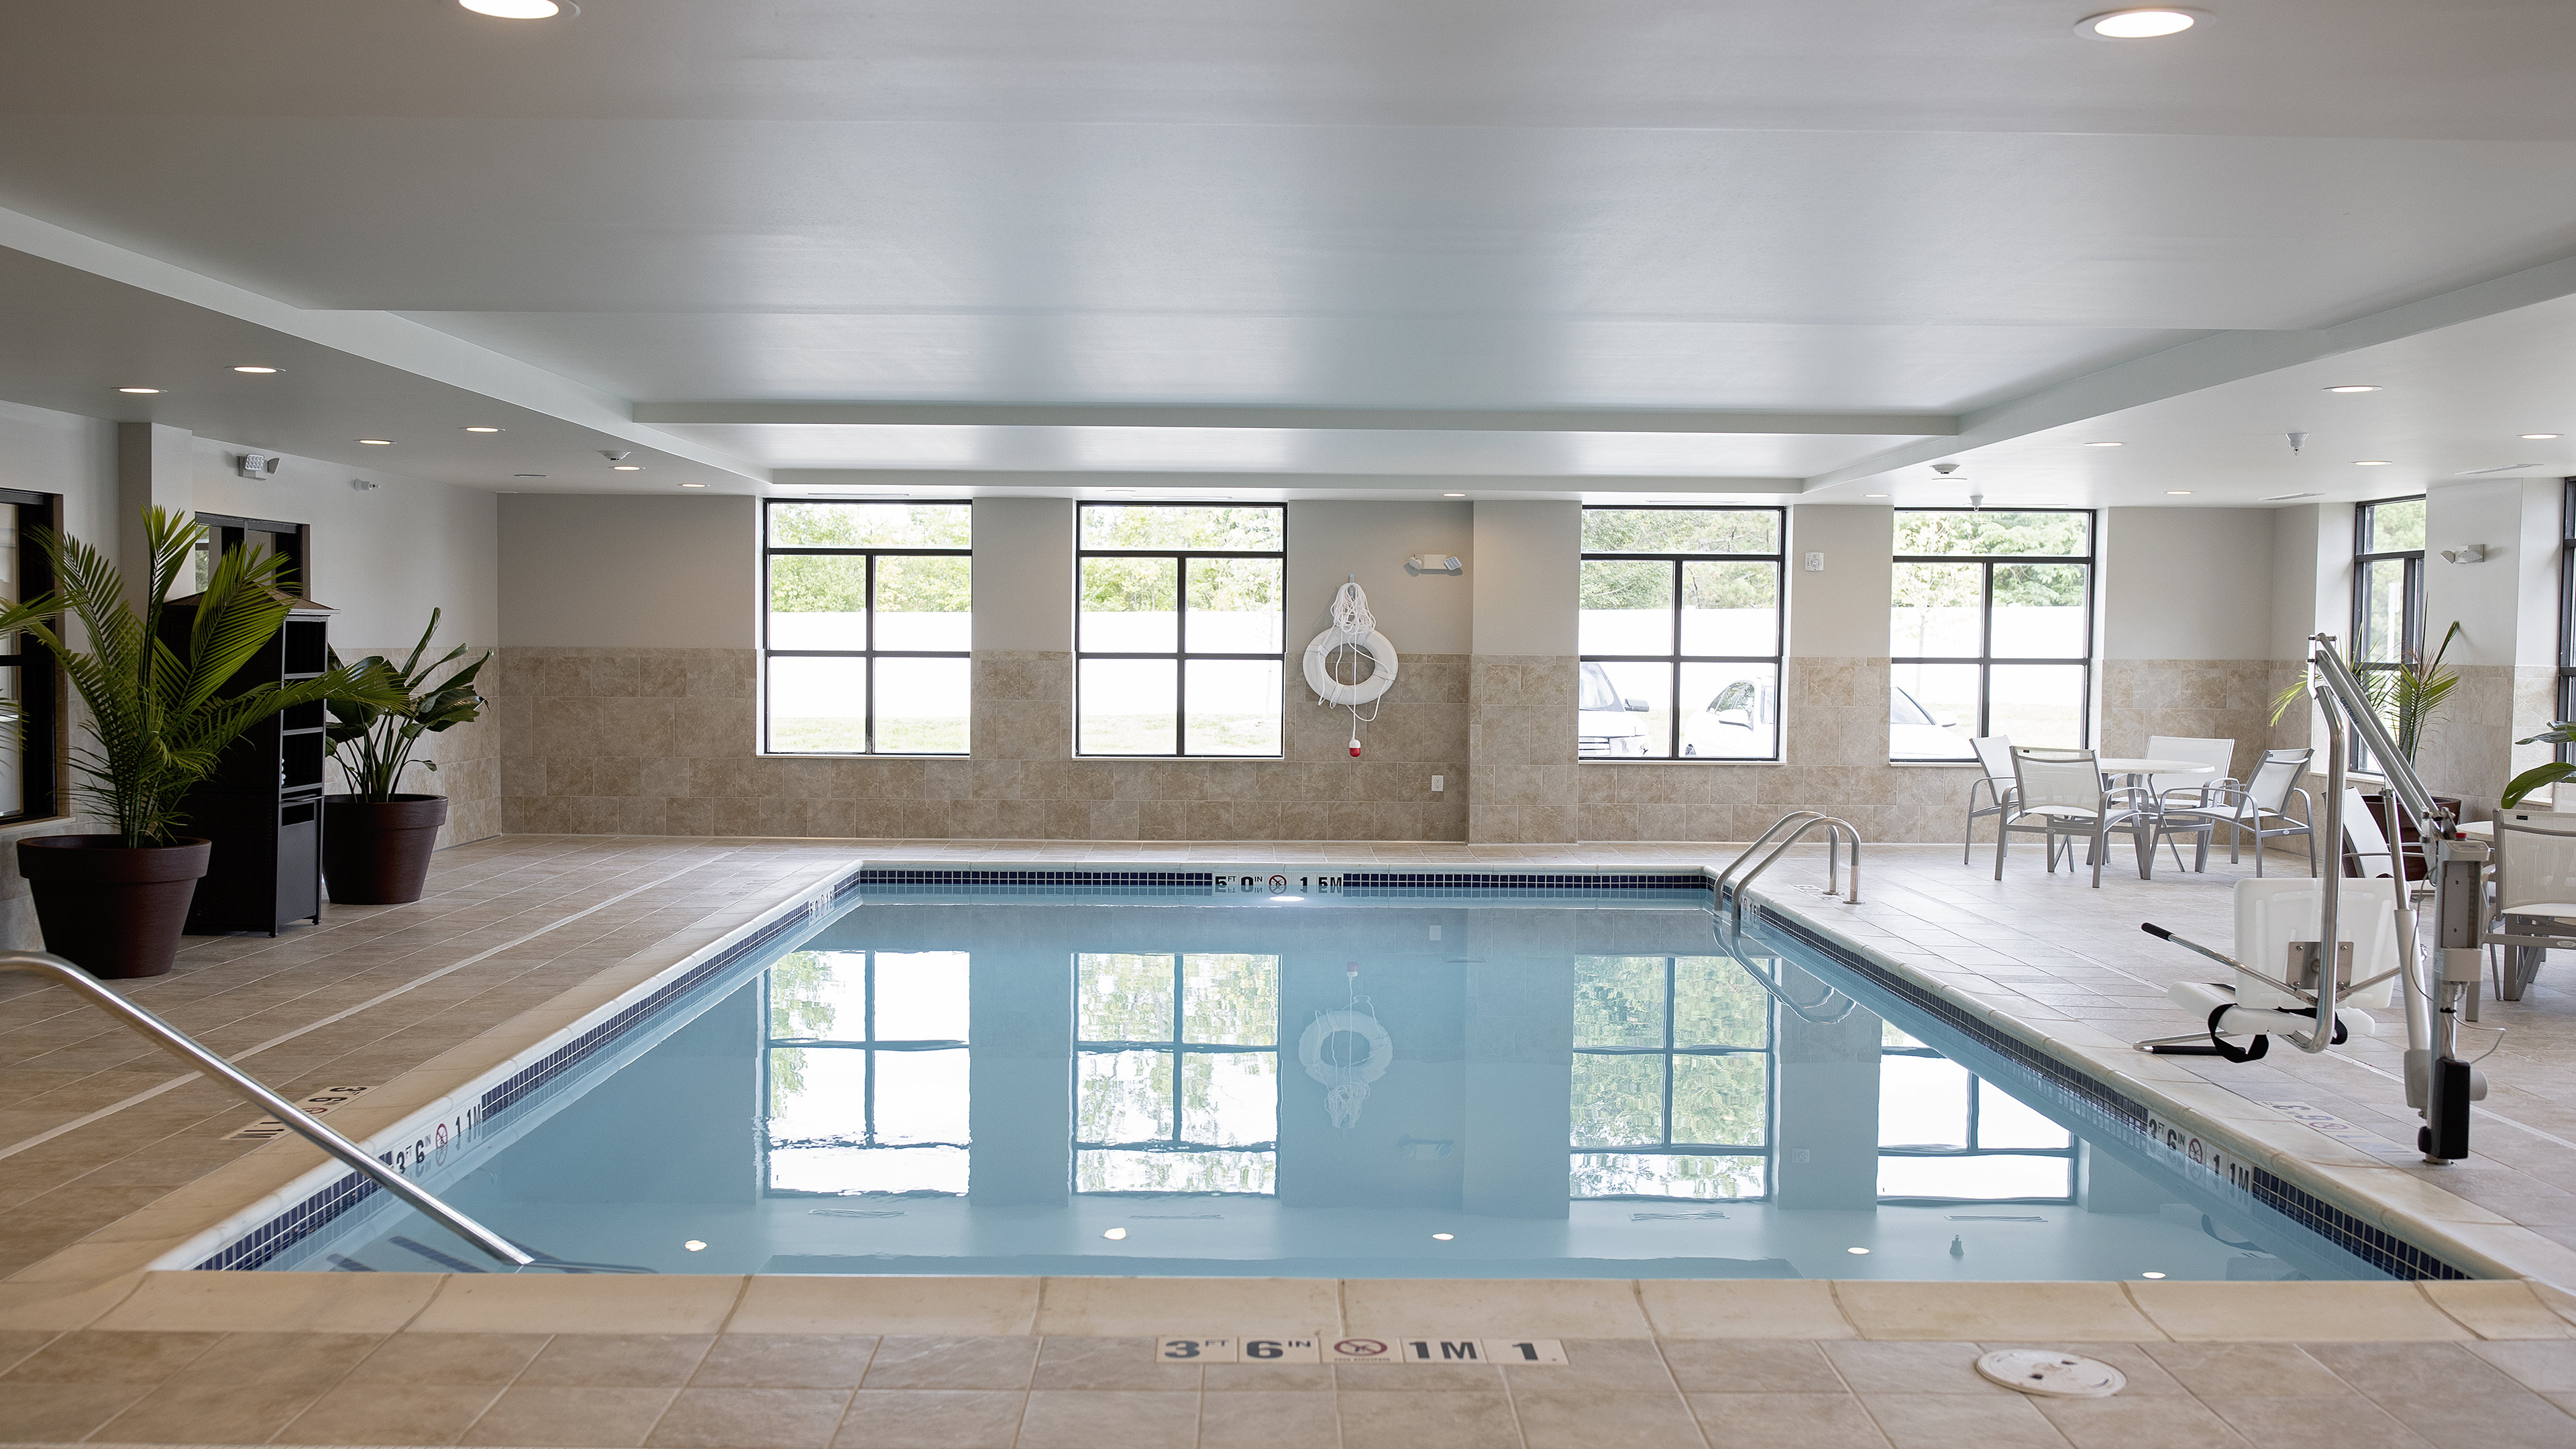 Everyone will enjoy our indoor heated pool